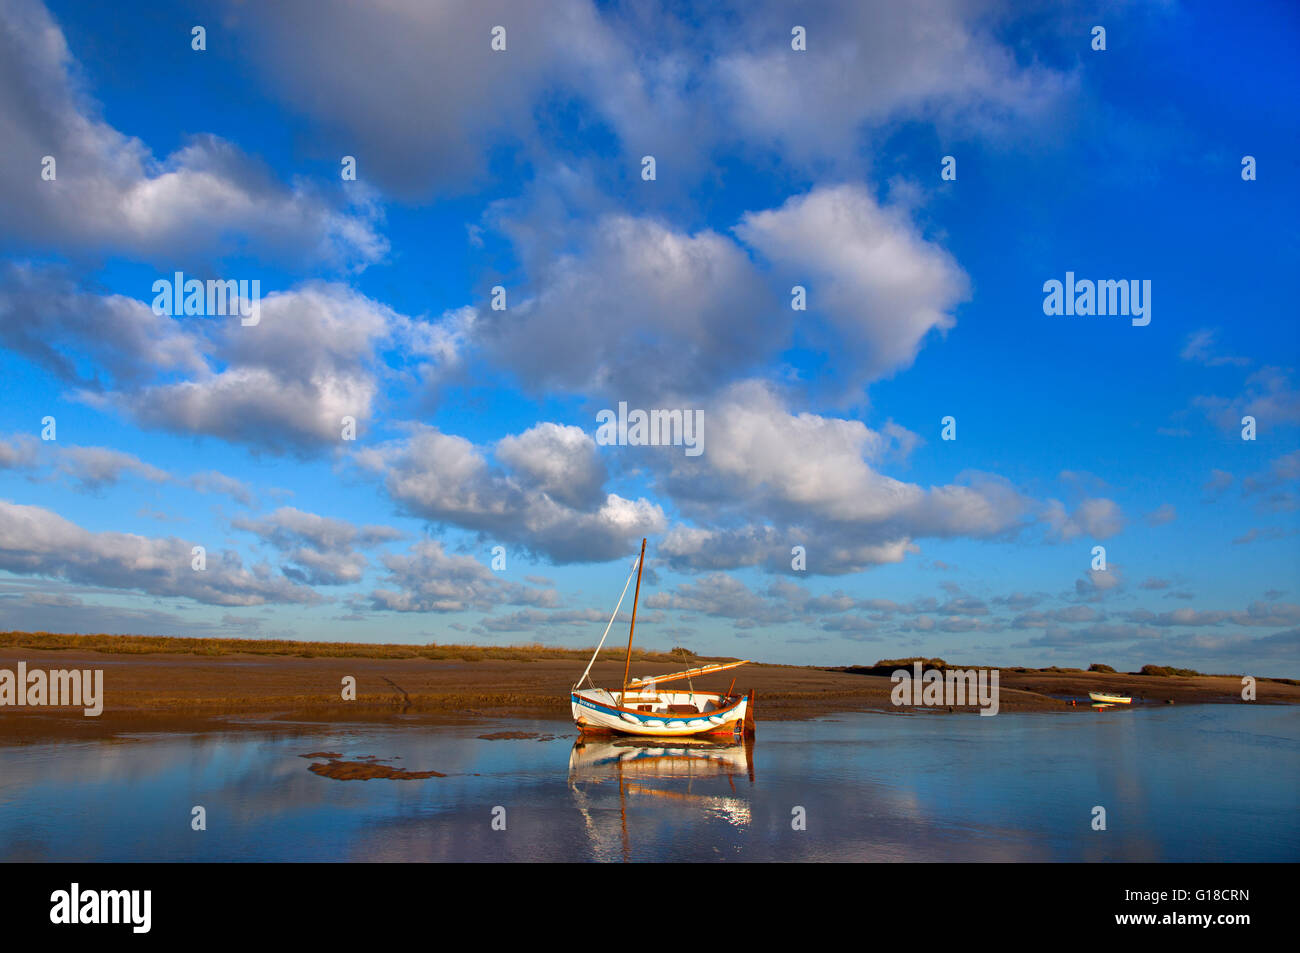 Moored boat on a Calm day at Brancaster Staithe Norfolk UK Winter Stock Photo